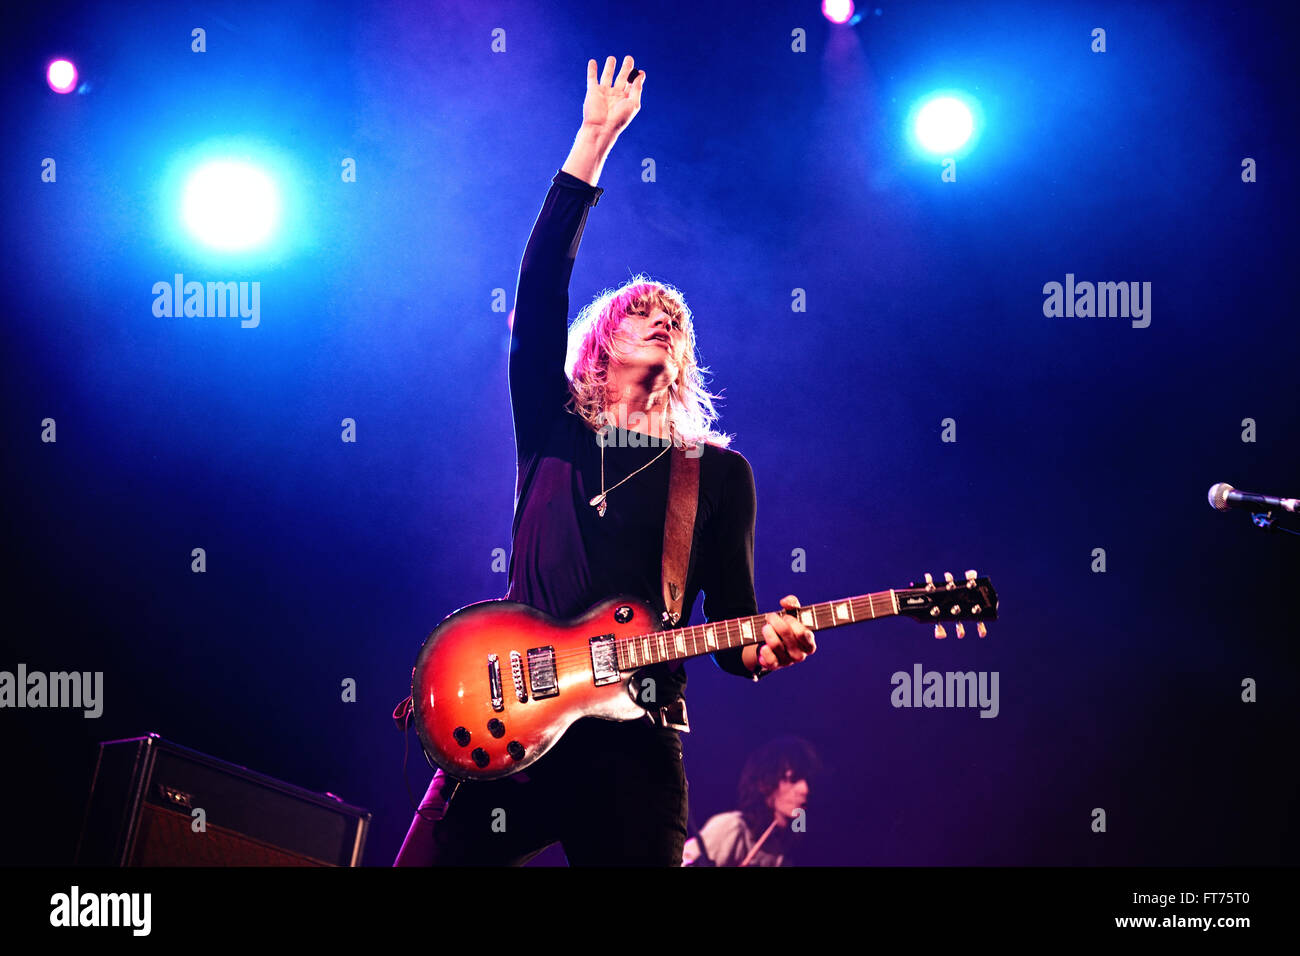 BILBAO, SPAIN - OCT 31: Go Go Berlin (band) live performance at Bime Festival on October 31, 2014 in Bilbao, Spain. Stock Photo